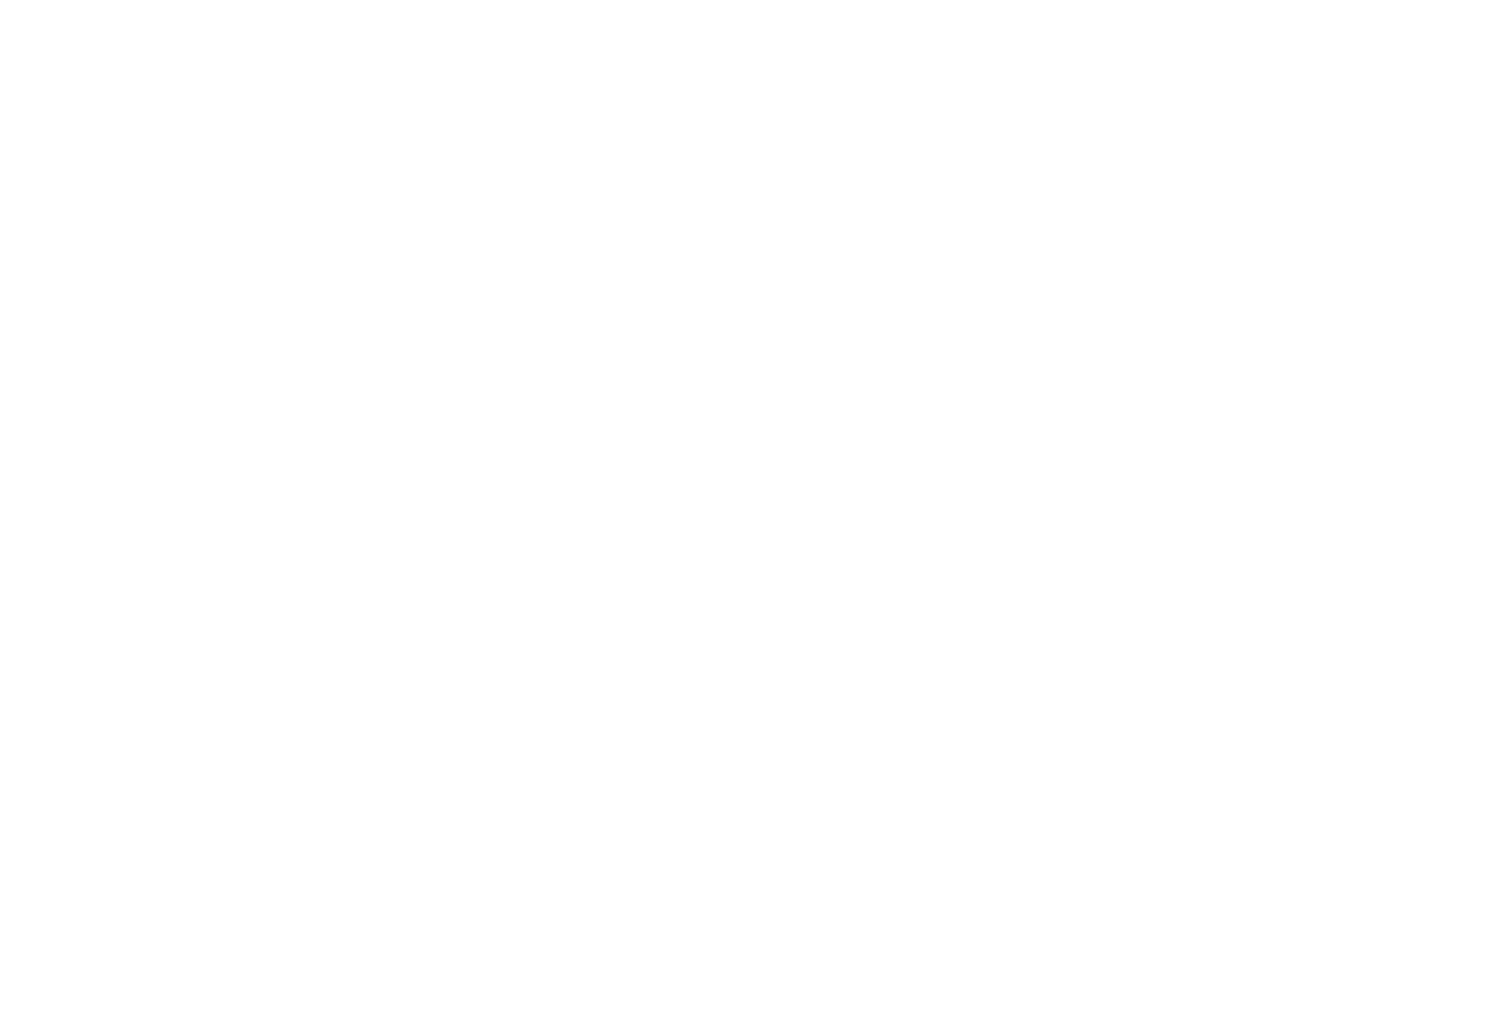 Called to be sons: Living under God our Father